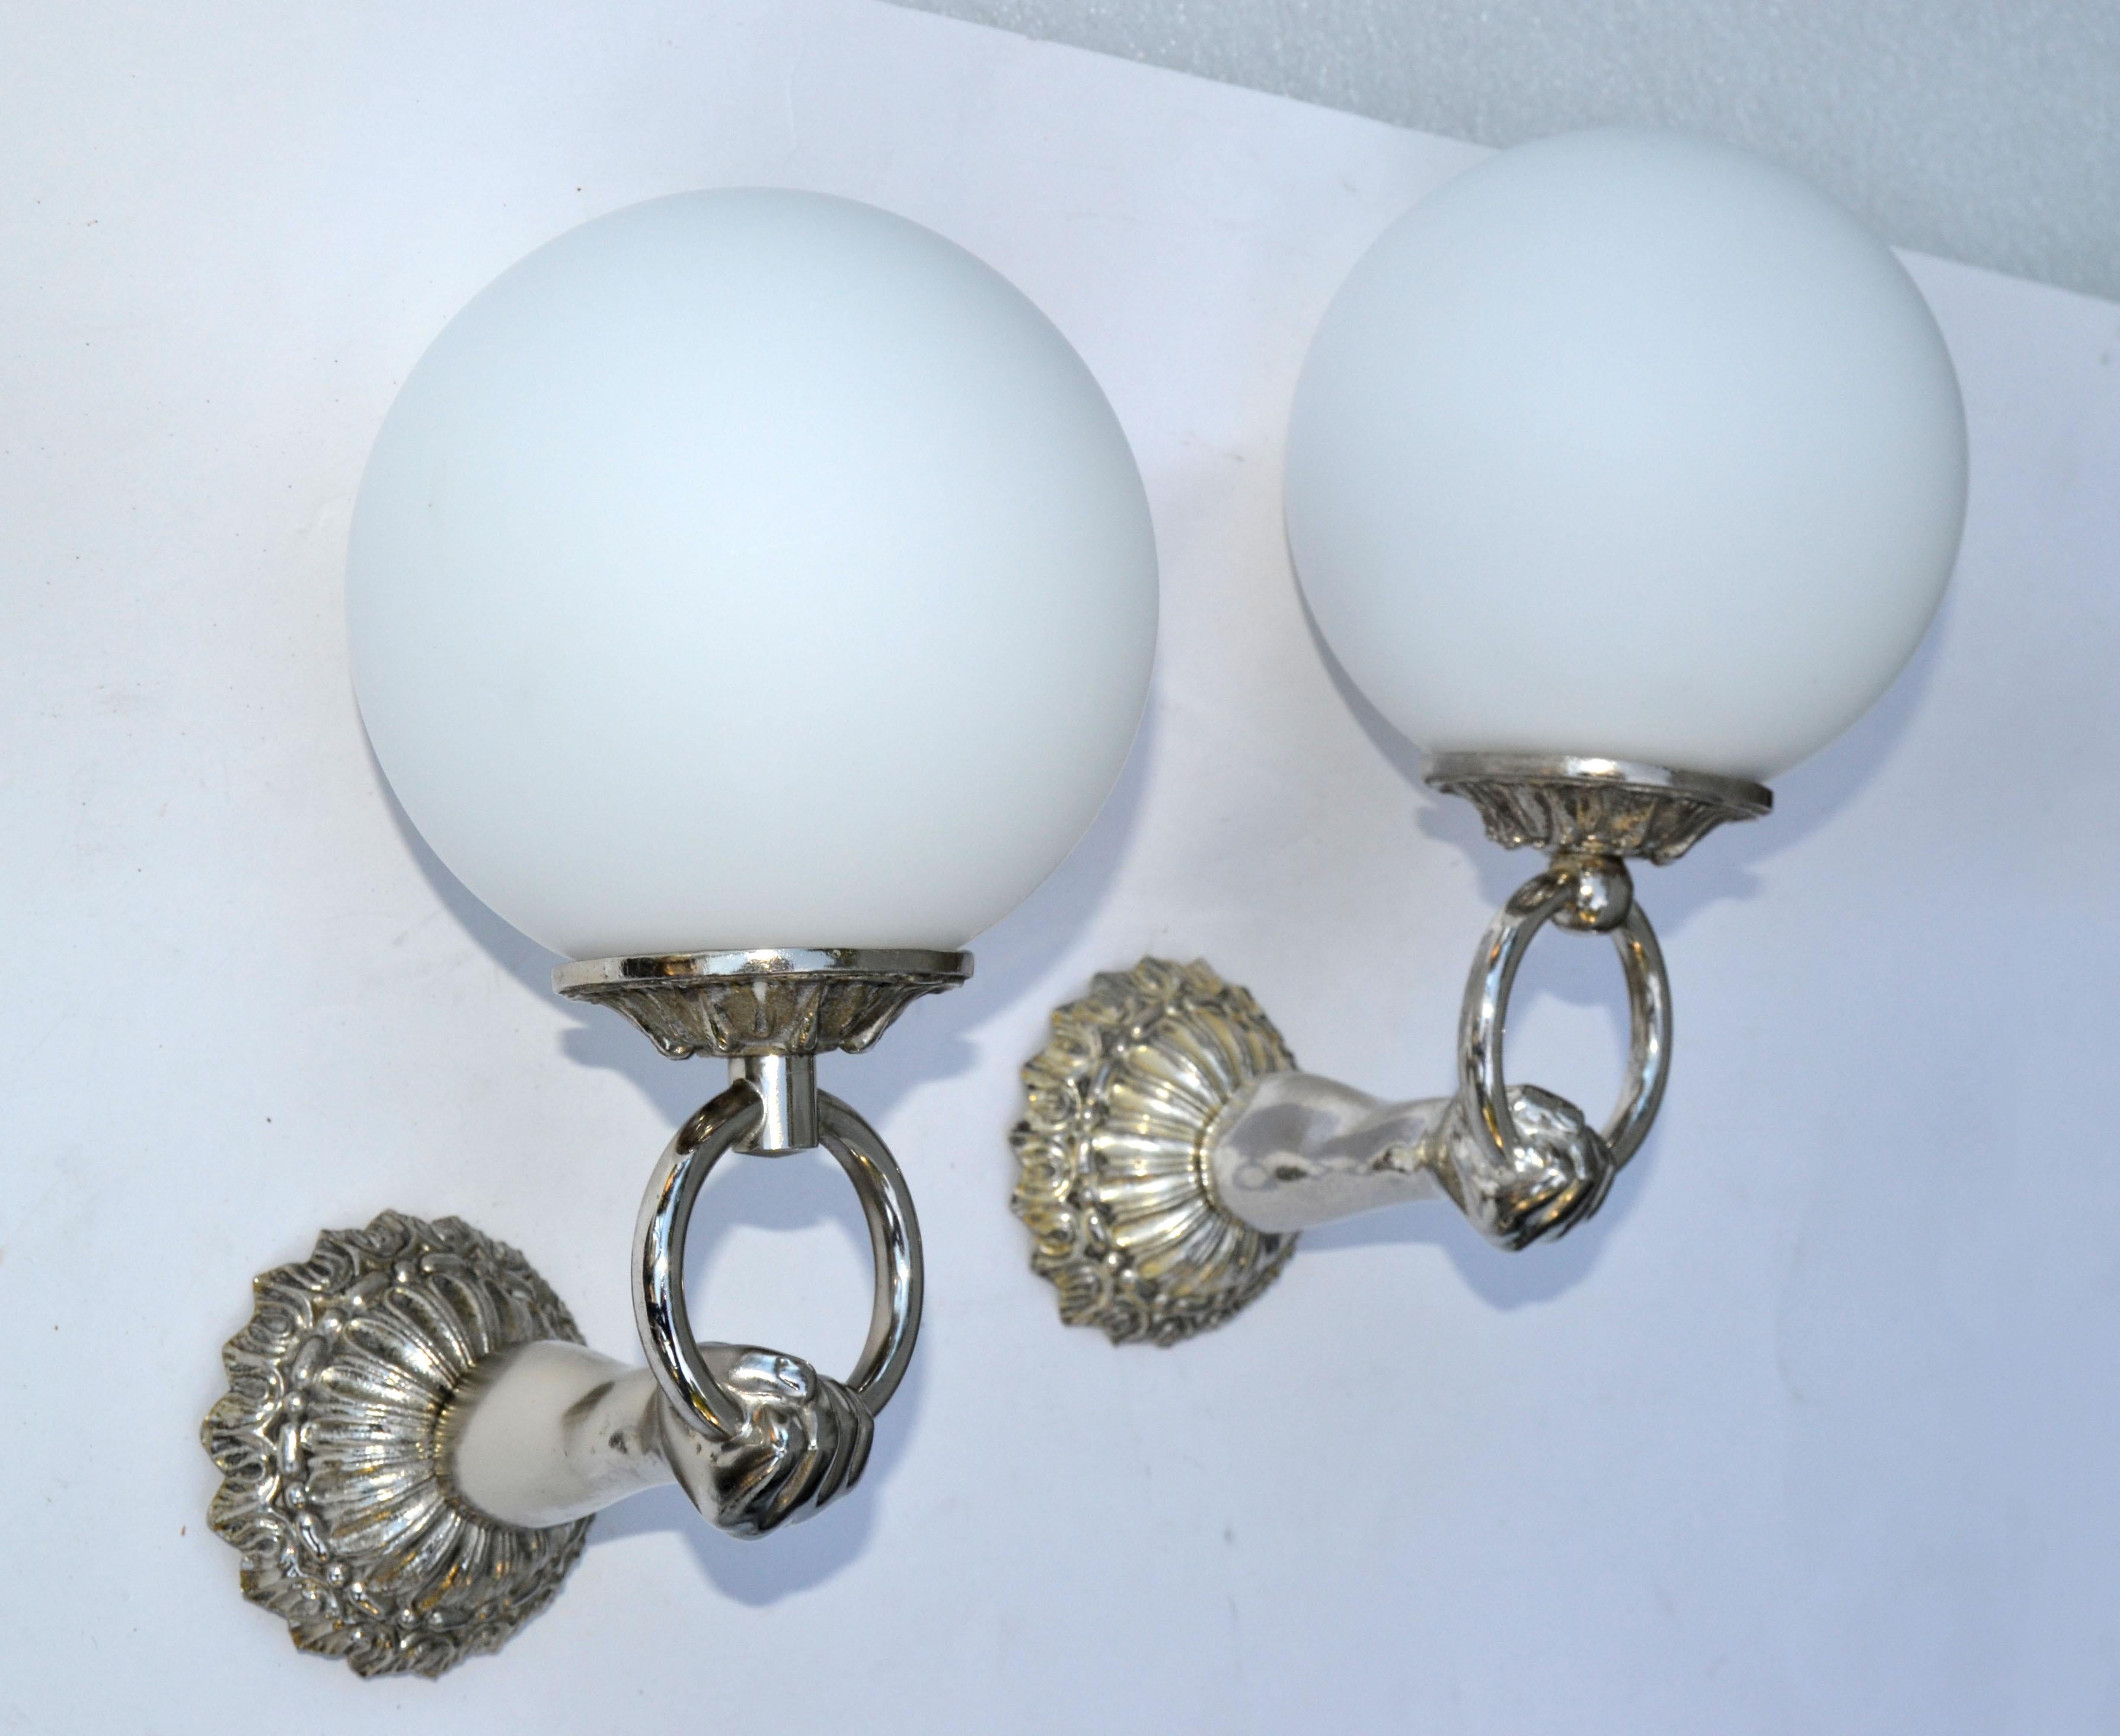 Pair of French neoclassical polished Nickel wall sconces figuring a hand holding a globe.
Each takes one light bulb with max. 60 watts.
US wired and in working condition.
Back plate measures 3.25 inches in diameter.
Please have a look on our